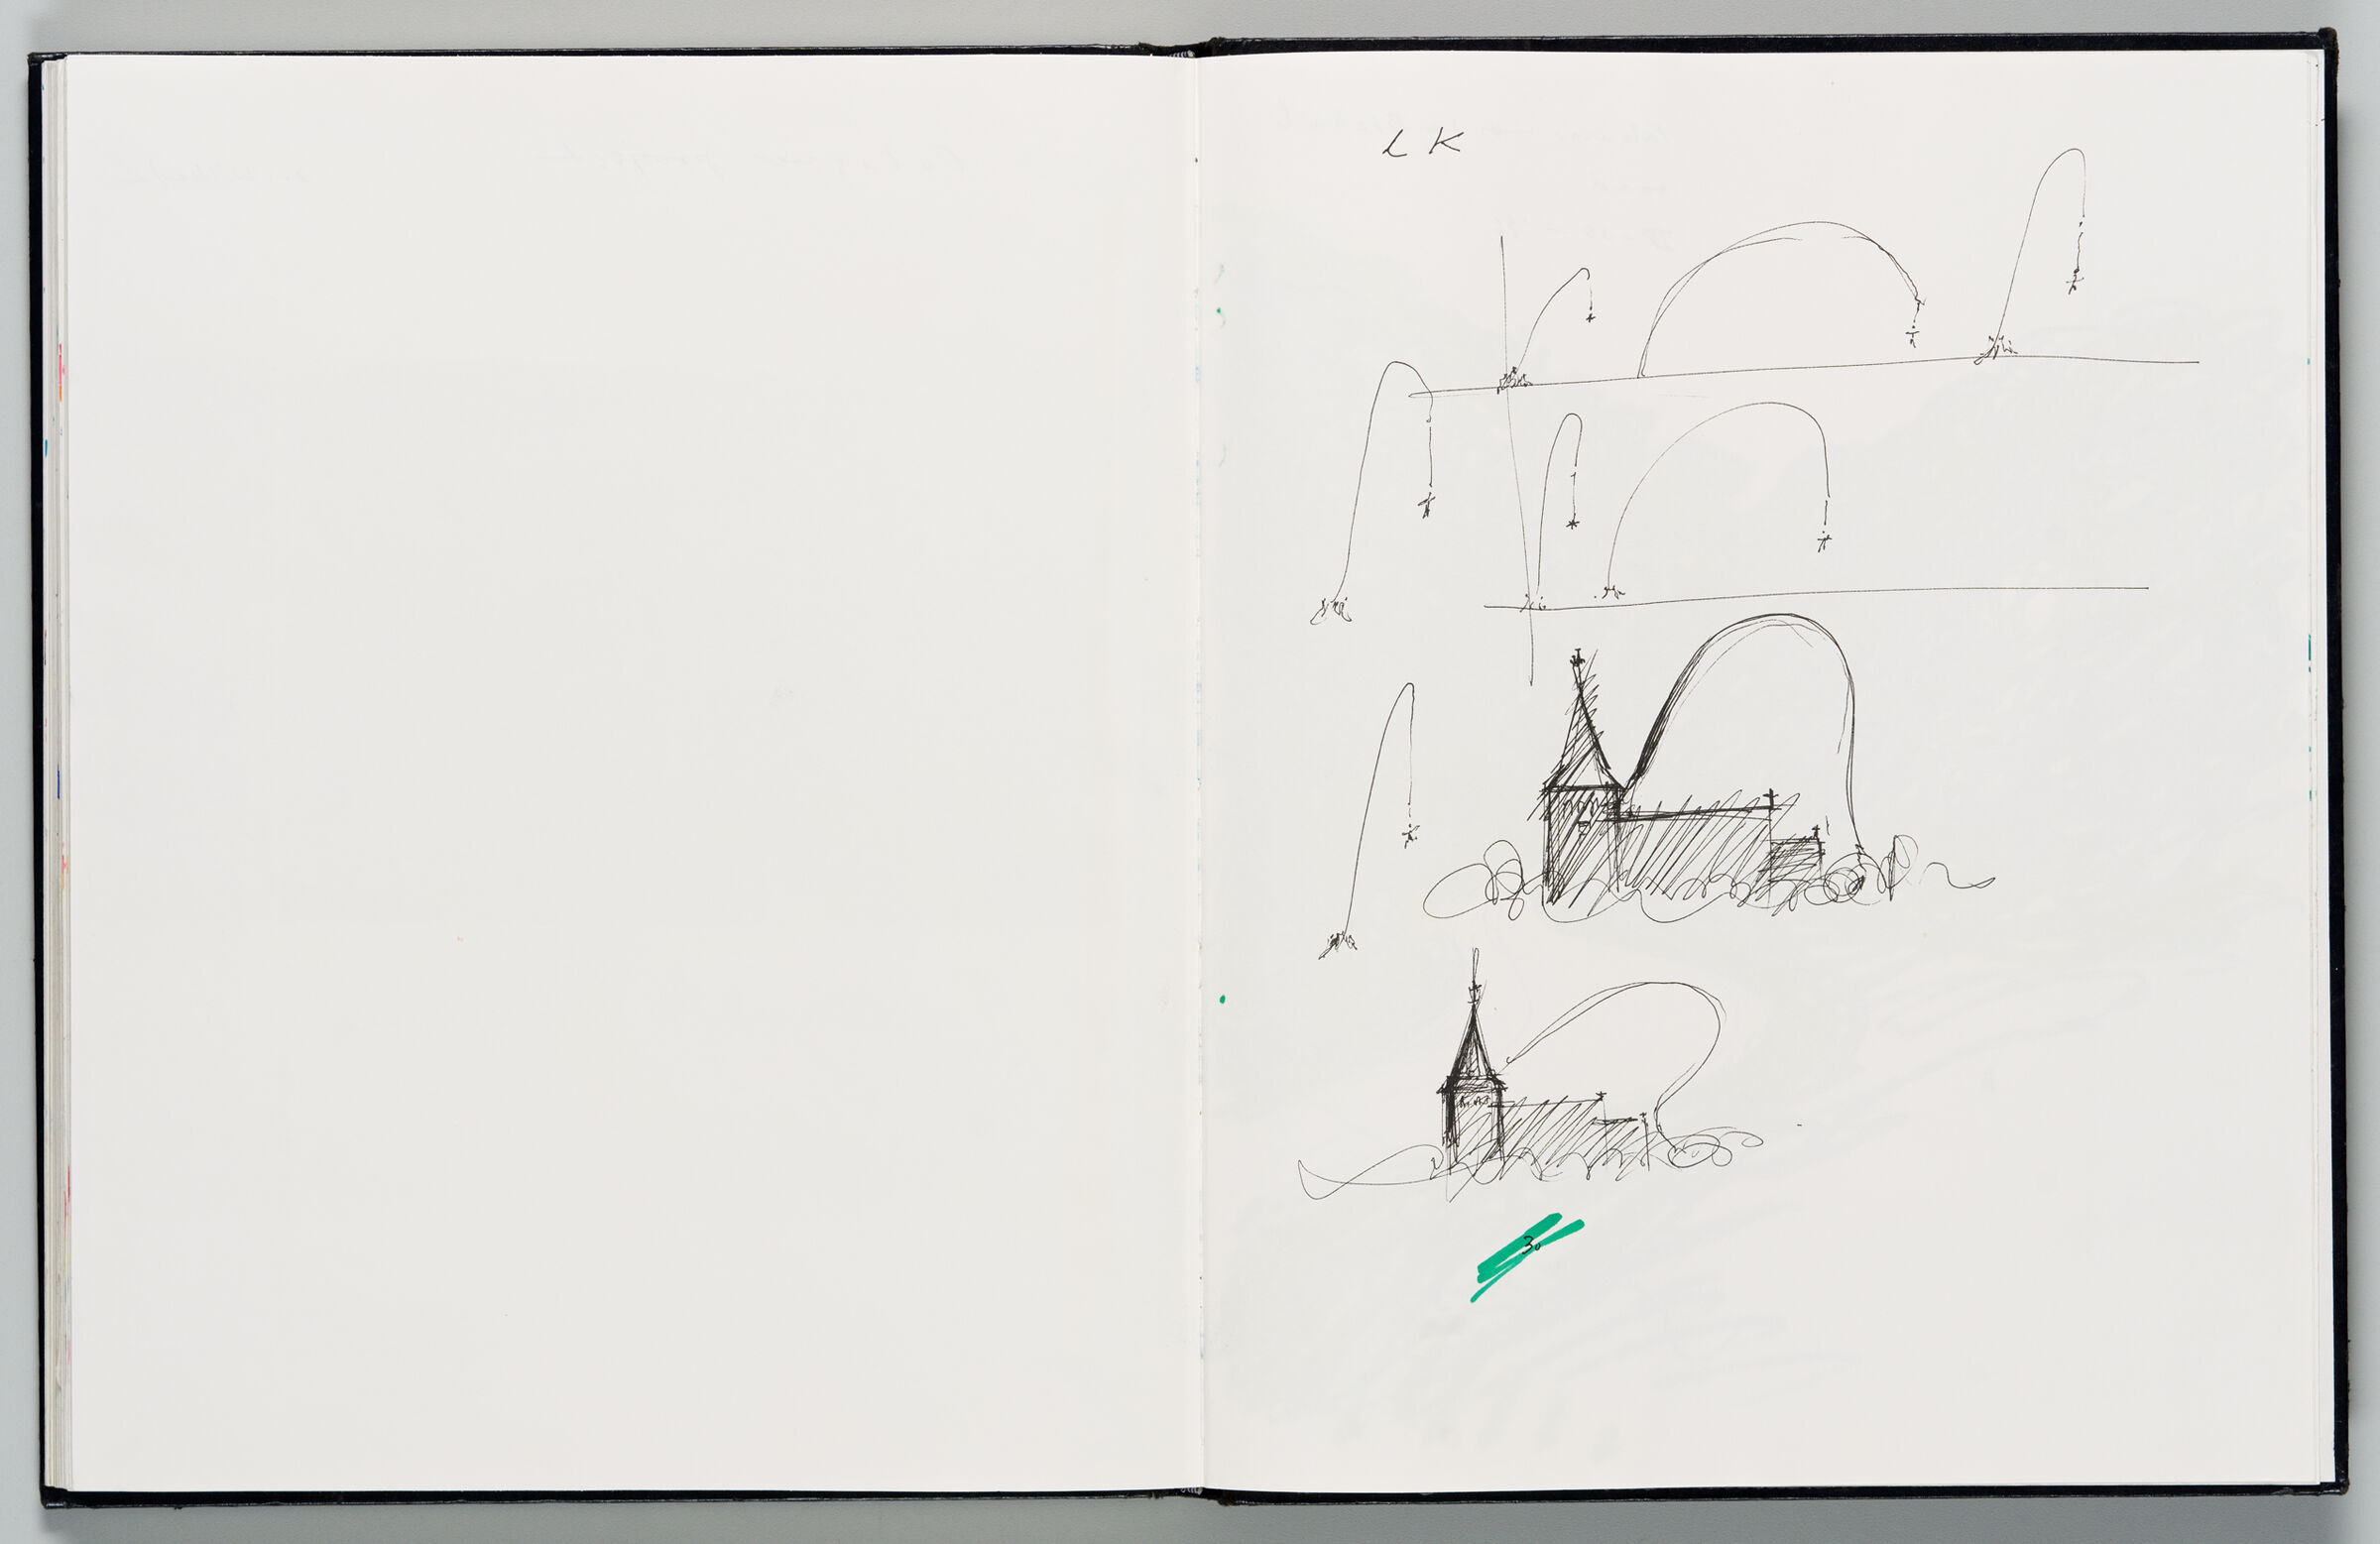 Untitled (Blank, Left Page); Untitled (Sky Event Sketches, Right Page)